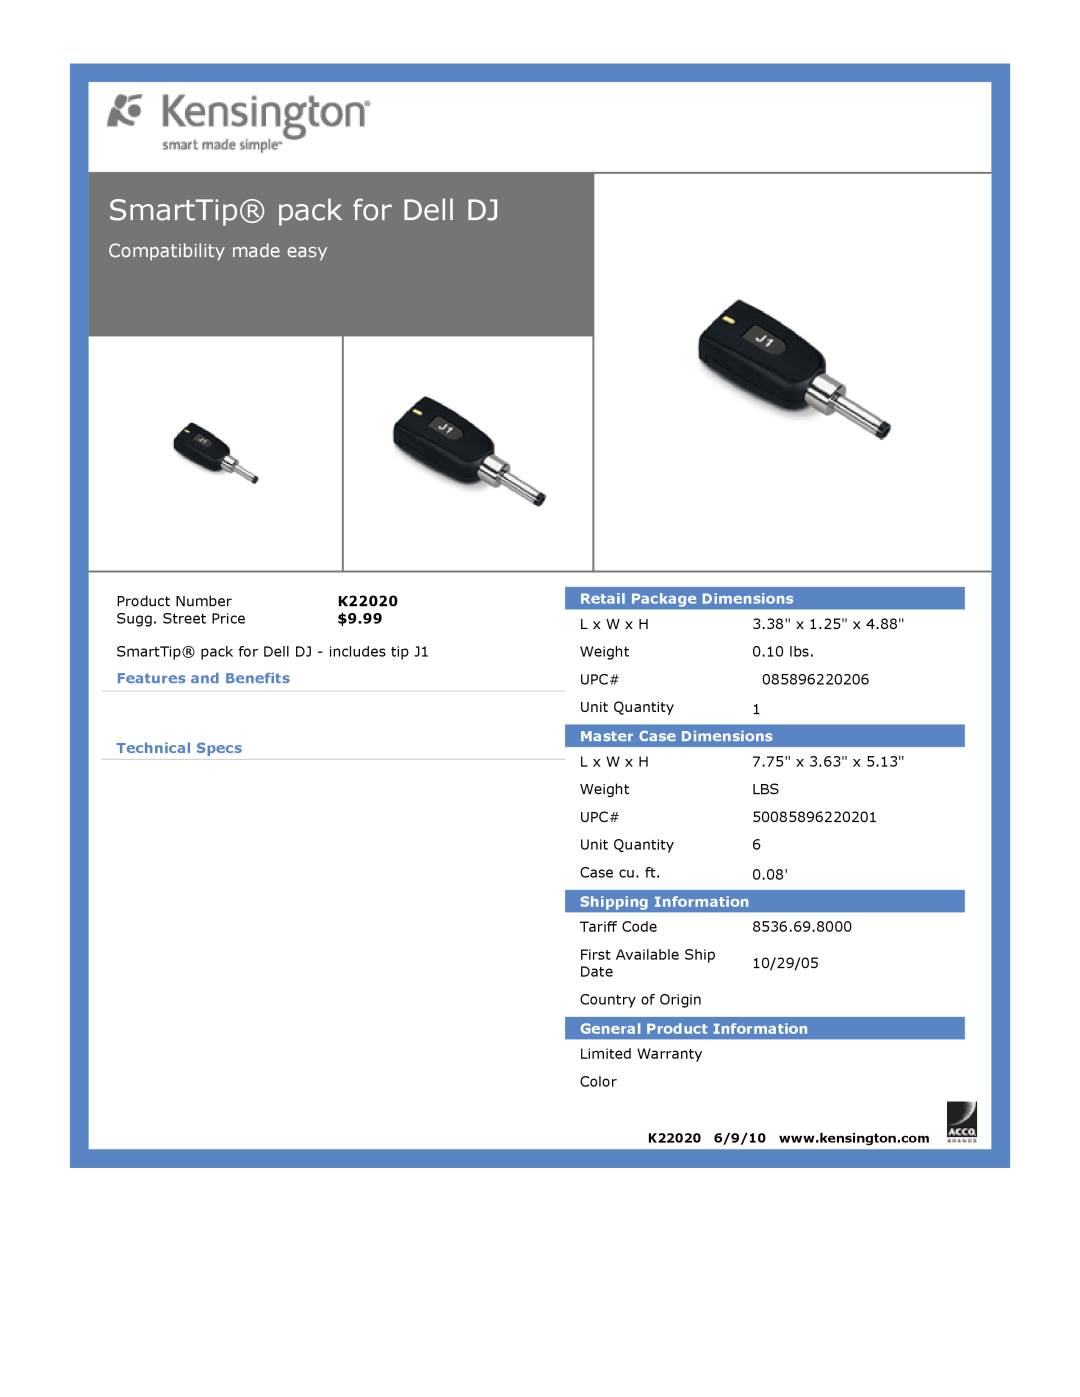 Kensington EU64325 SmartTip pack for Dell DJ, Compatibility made easy, $9.99, Features and Benefits Technical Specs 